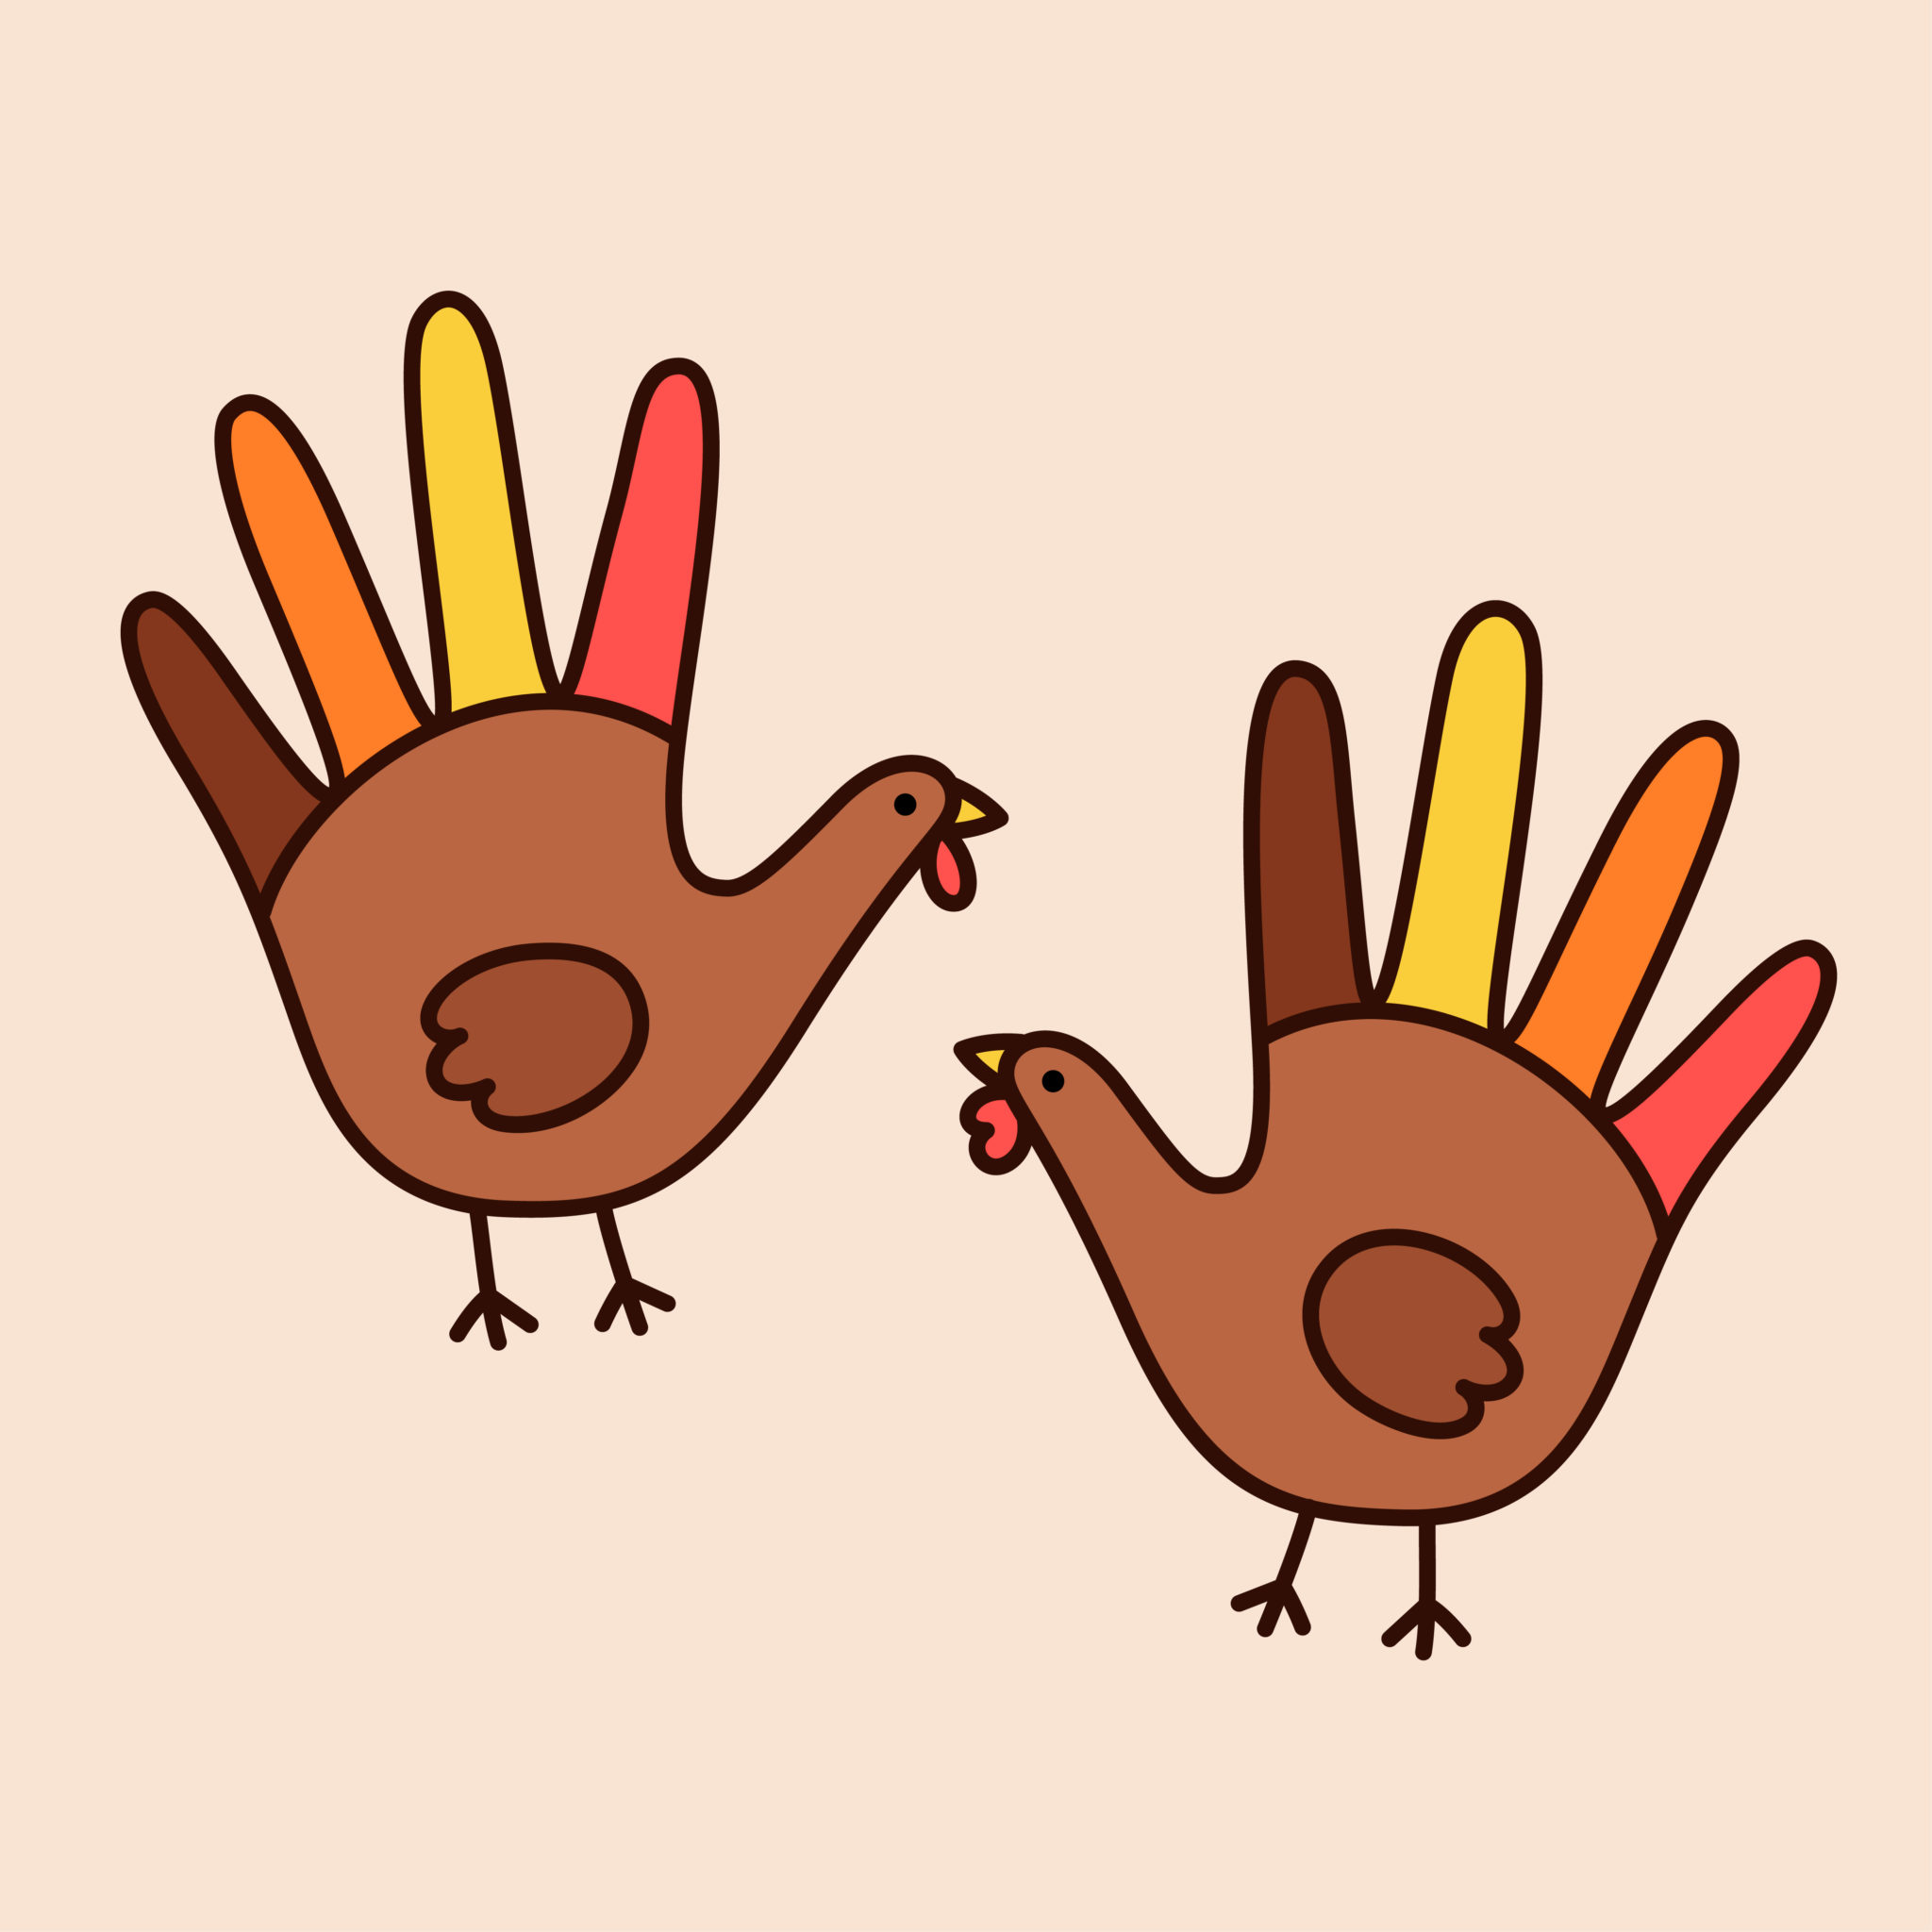 Simple Thanksgiving Crafts to Decorate Your InTown Suite